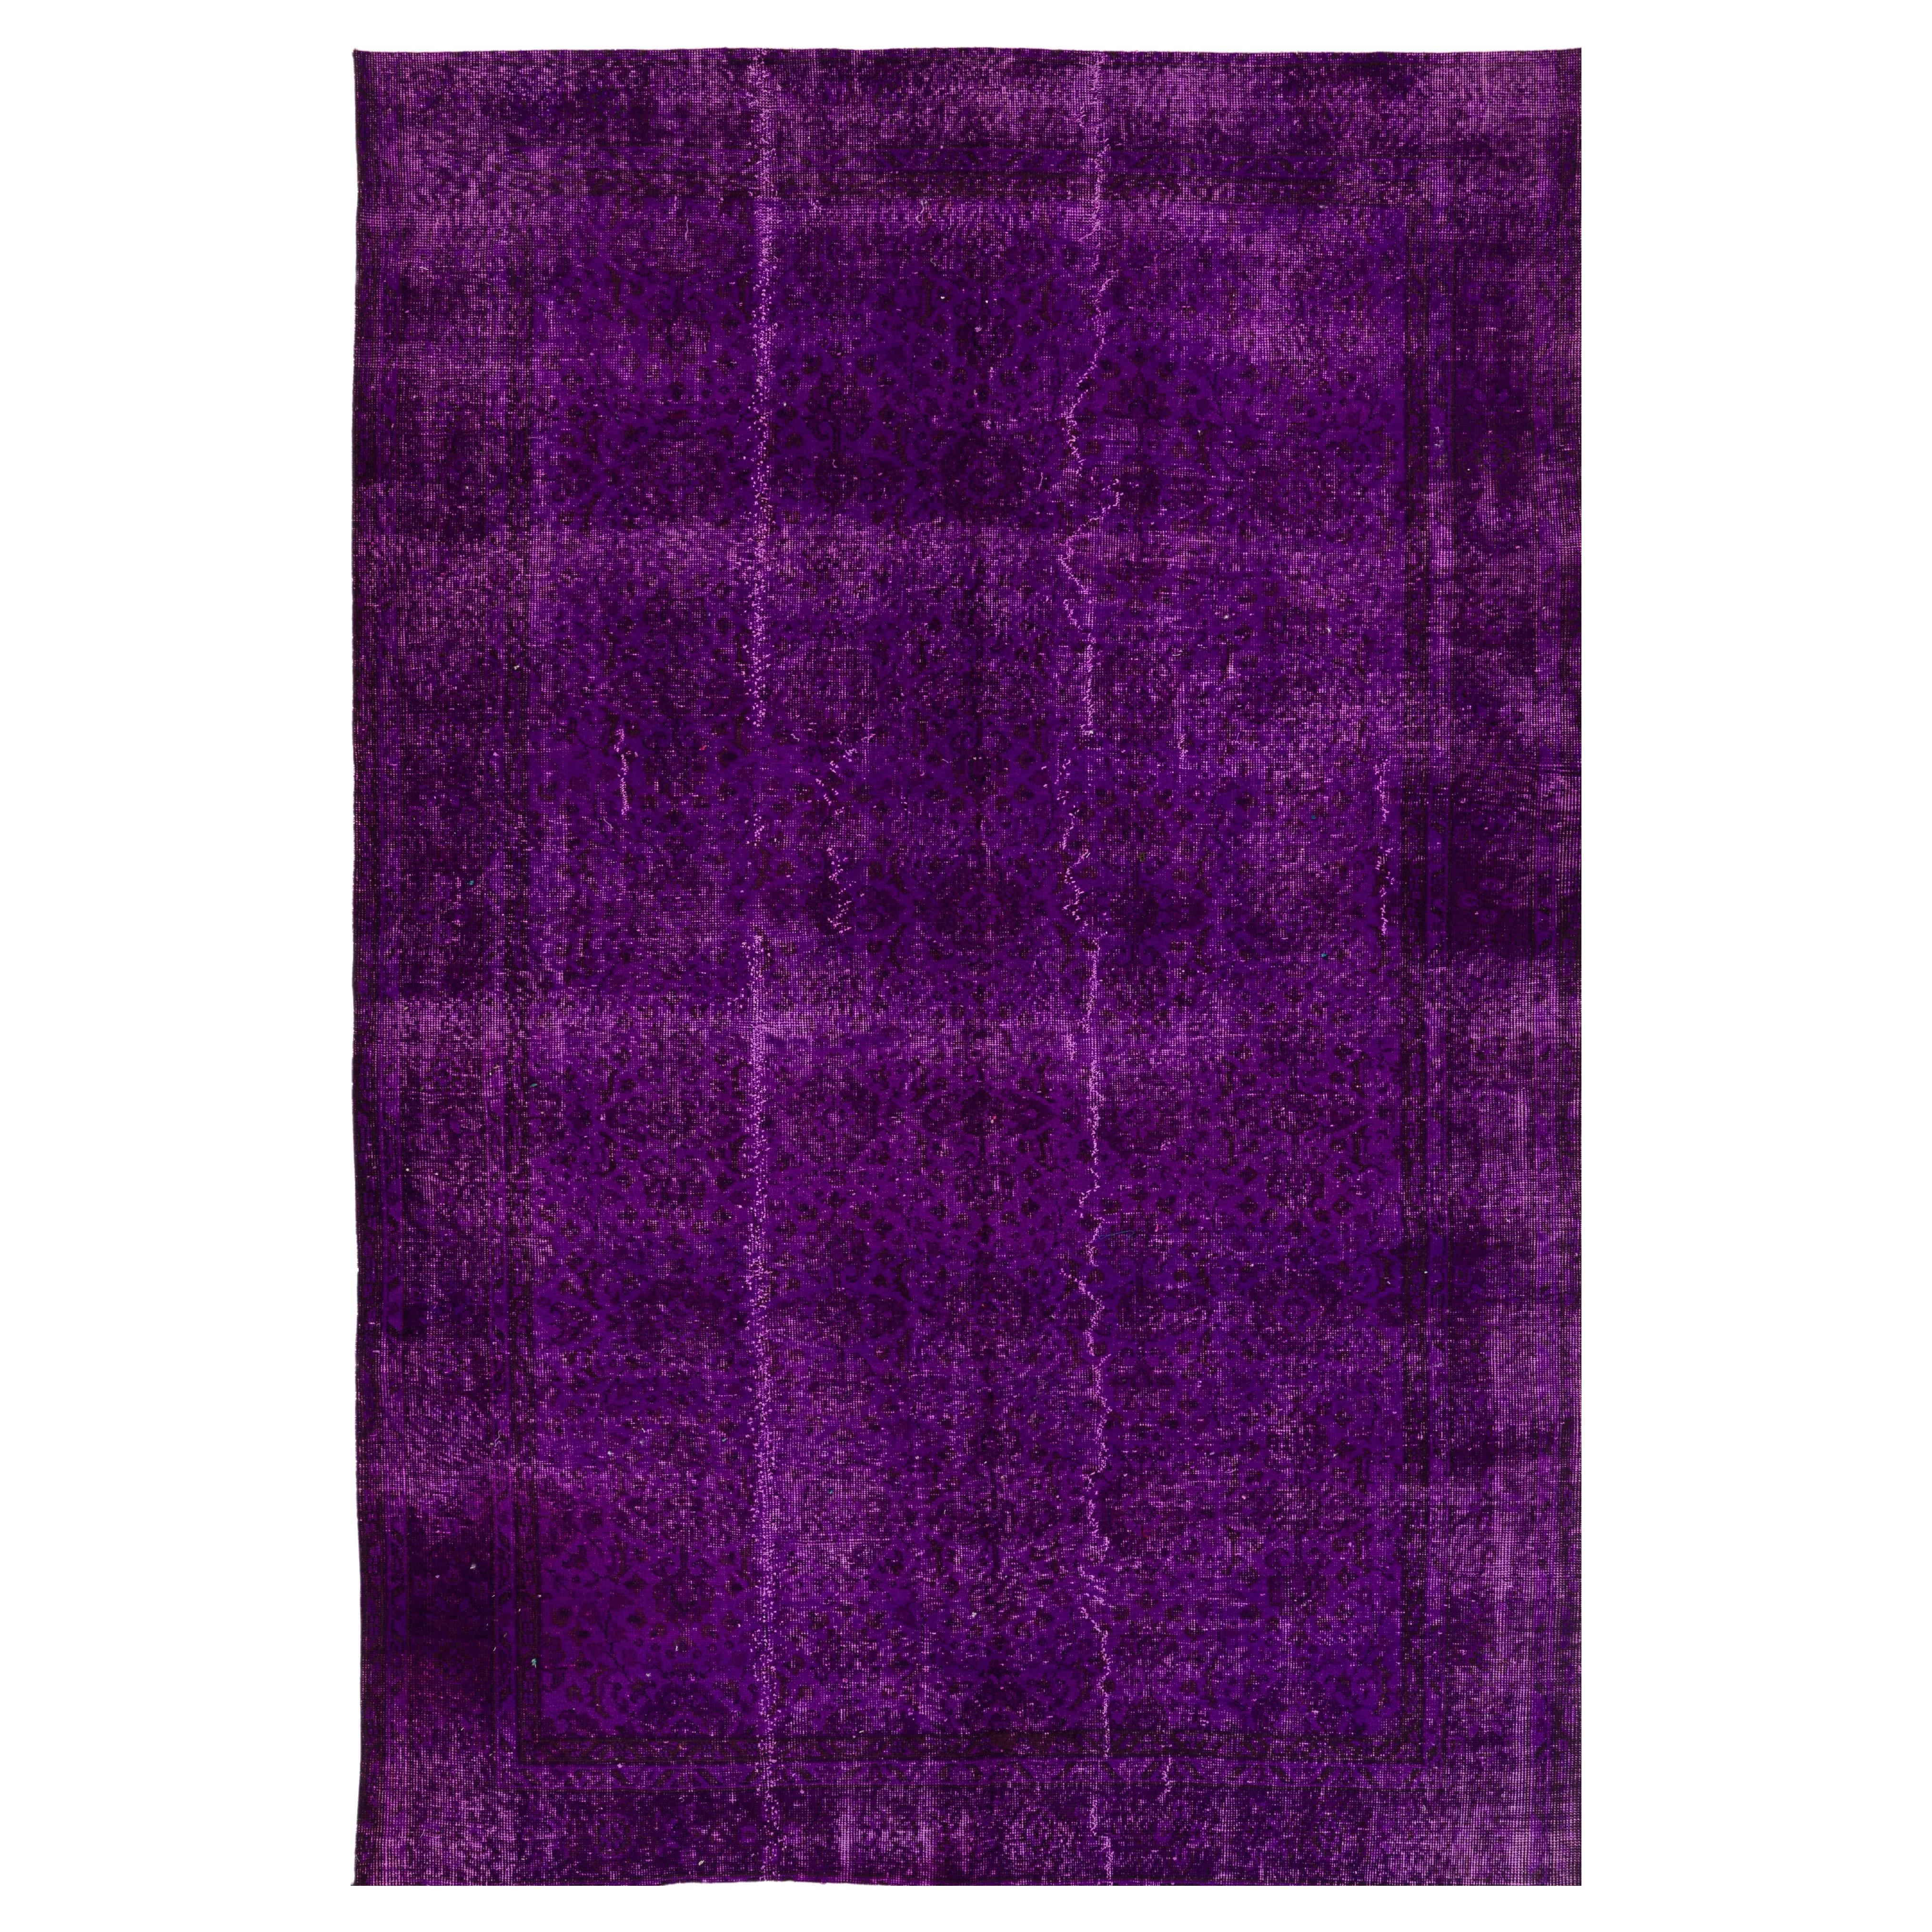 6.5x9.6 Ft Vintage Handmade Rug Over-Dyed in Purple, Great for Modern Interiors